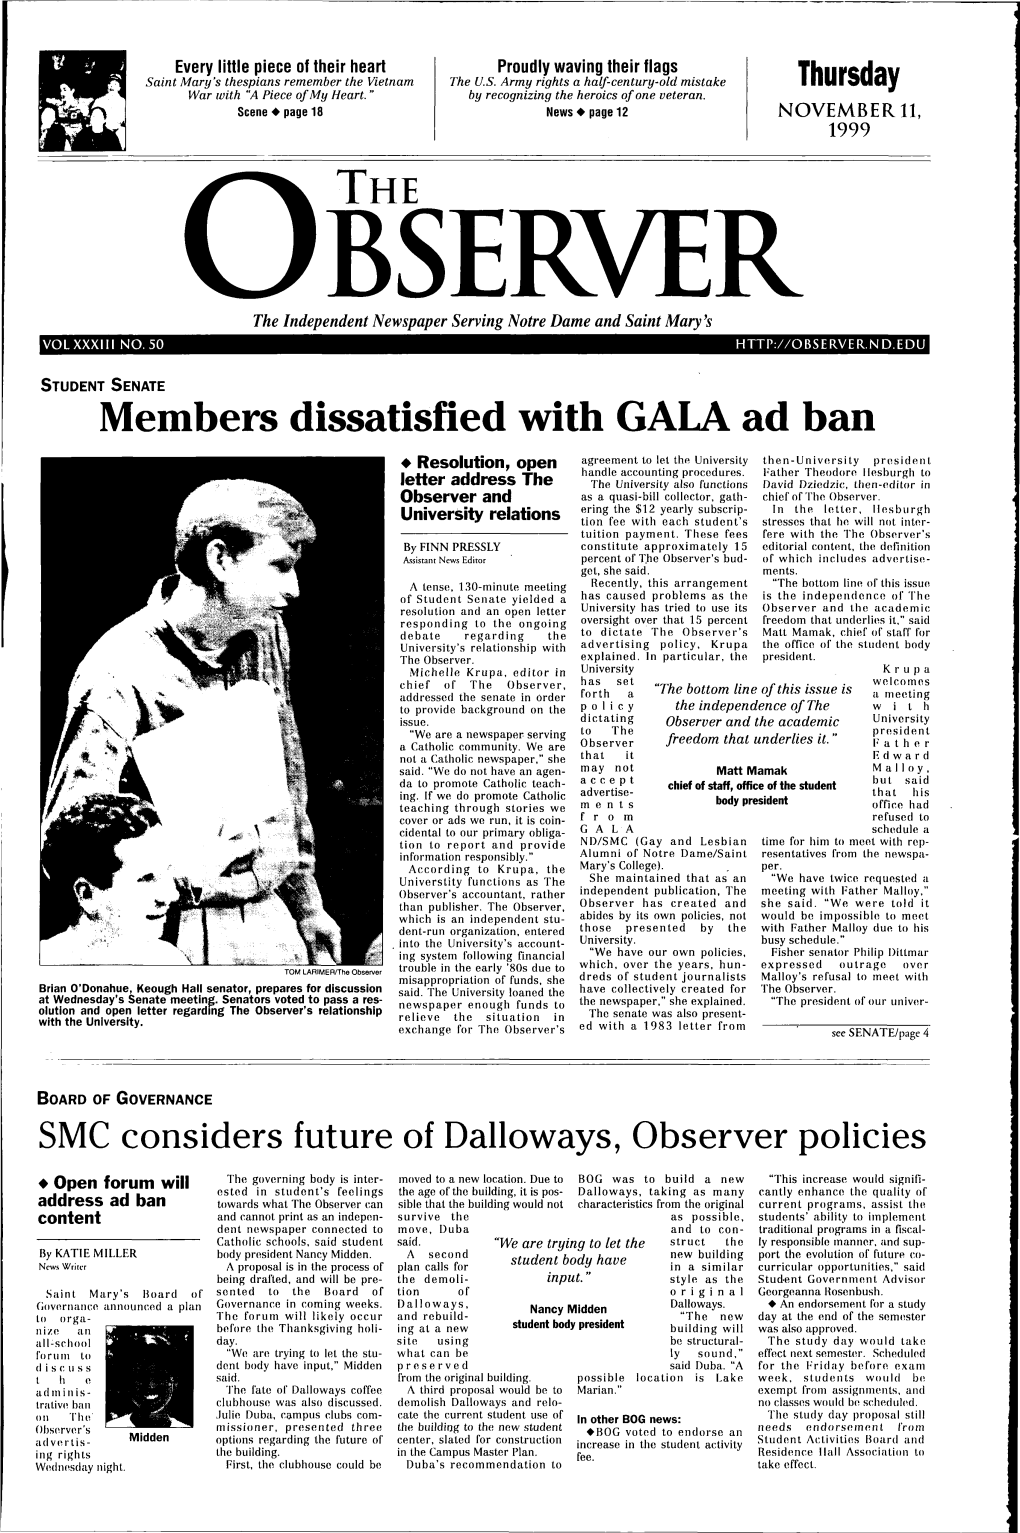 Members Dissatisfied with GALA Ad Ban • Resolution, Open Agreement to Let Thfl University Then-University President Handle Accounting Procedures